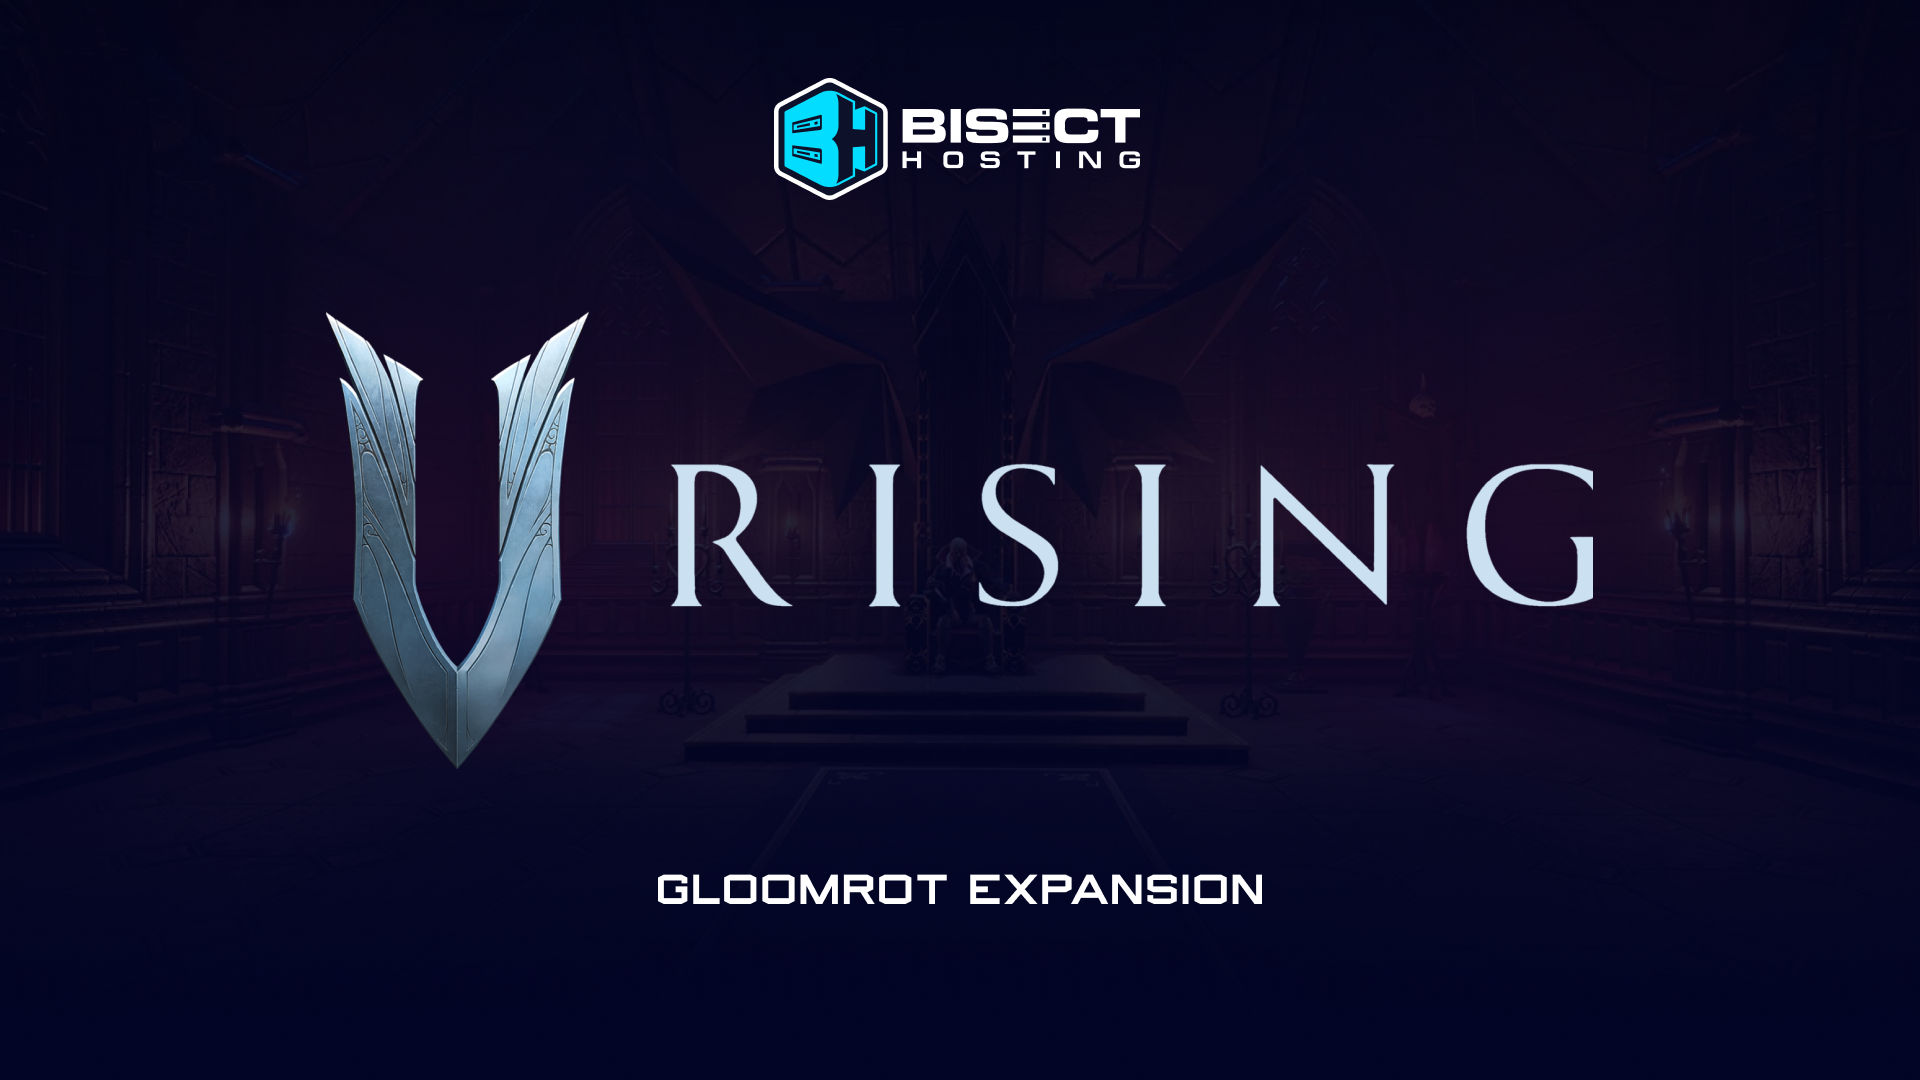 V Rising Gloomrot Update: Release Date, New Features, & More